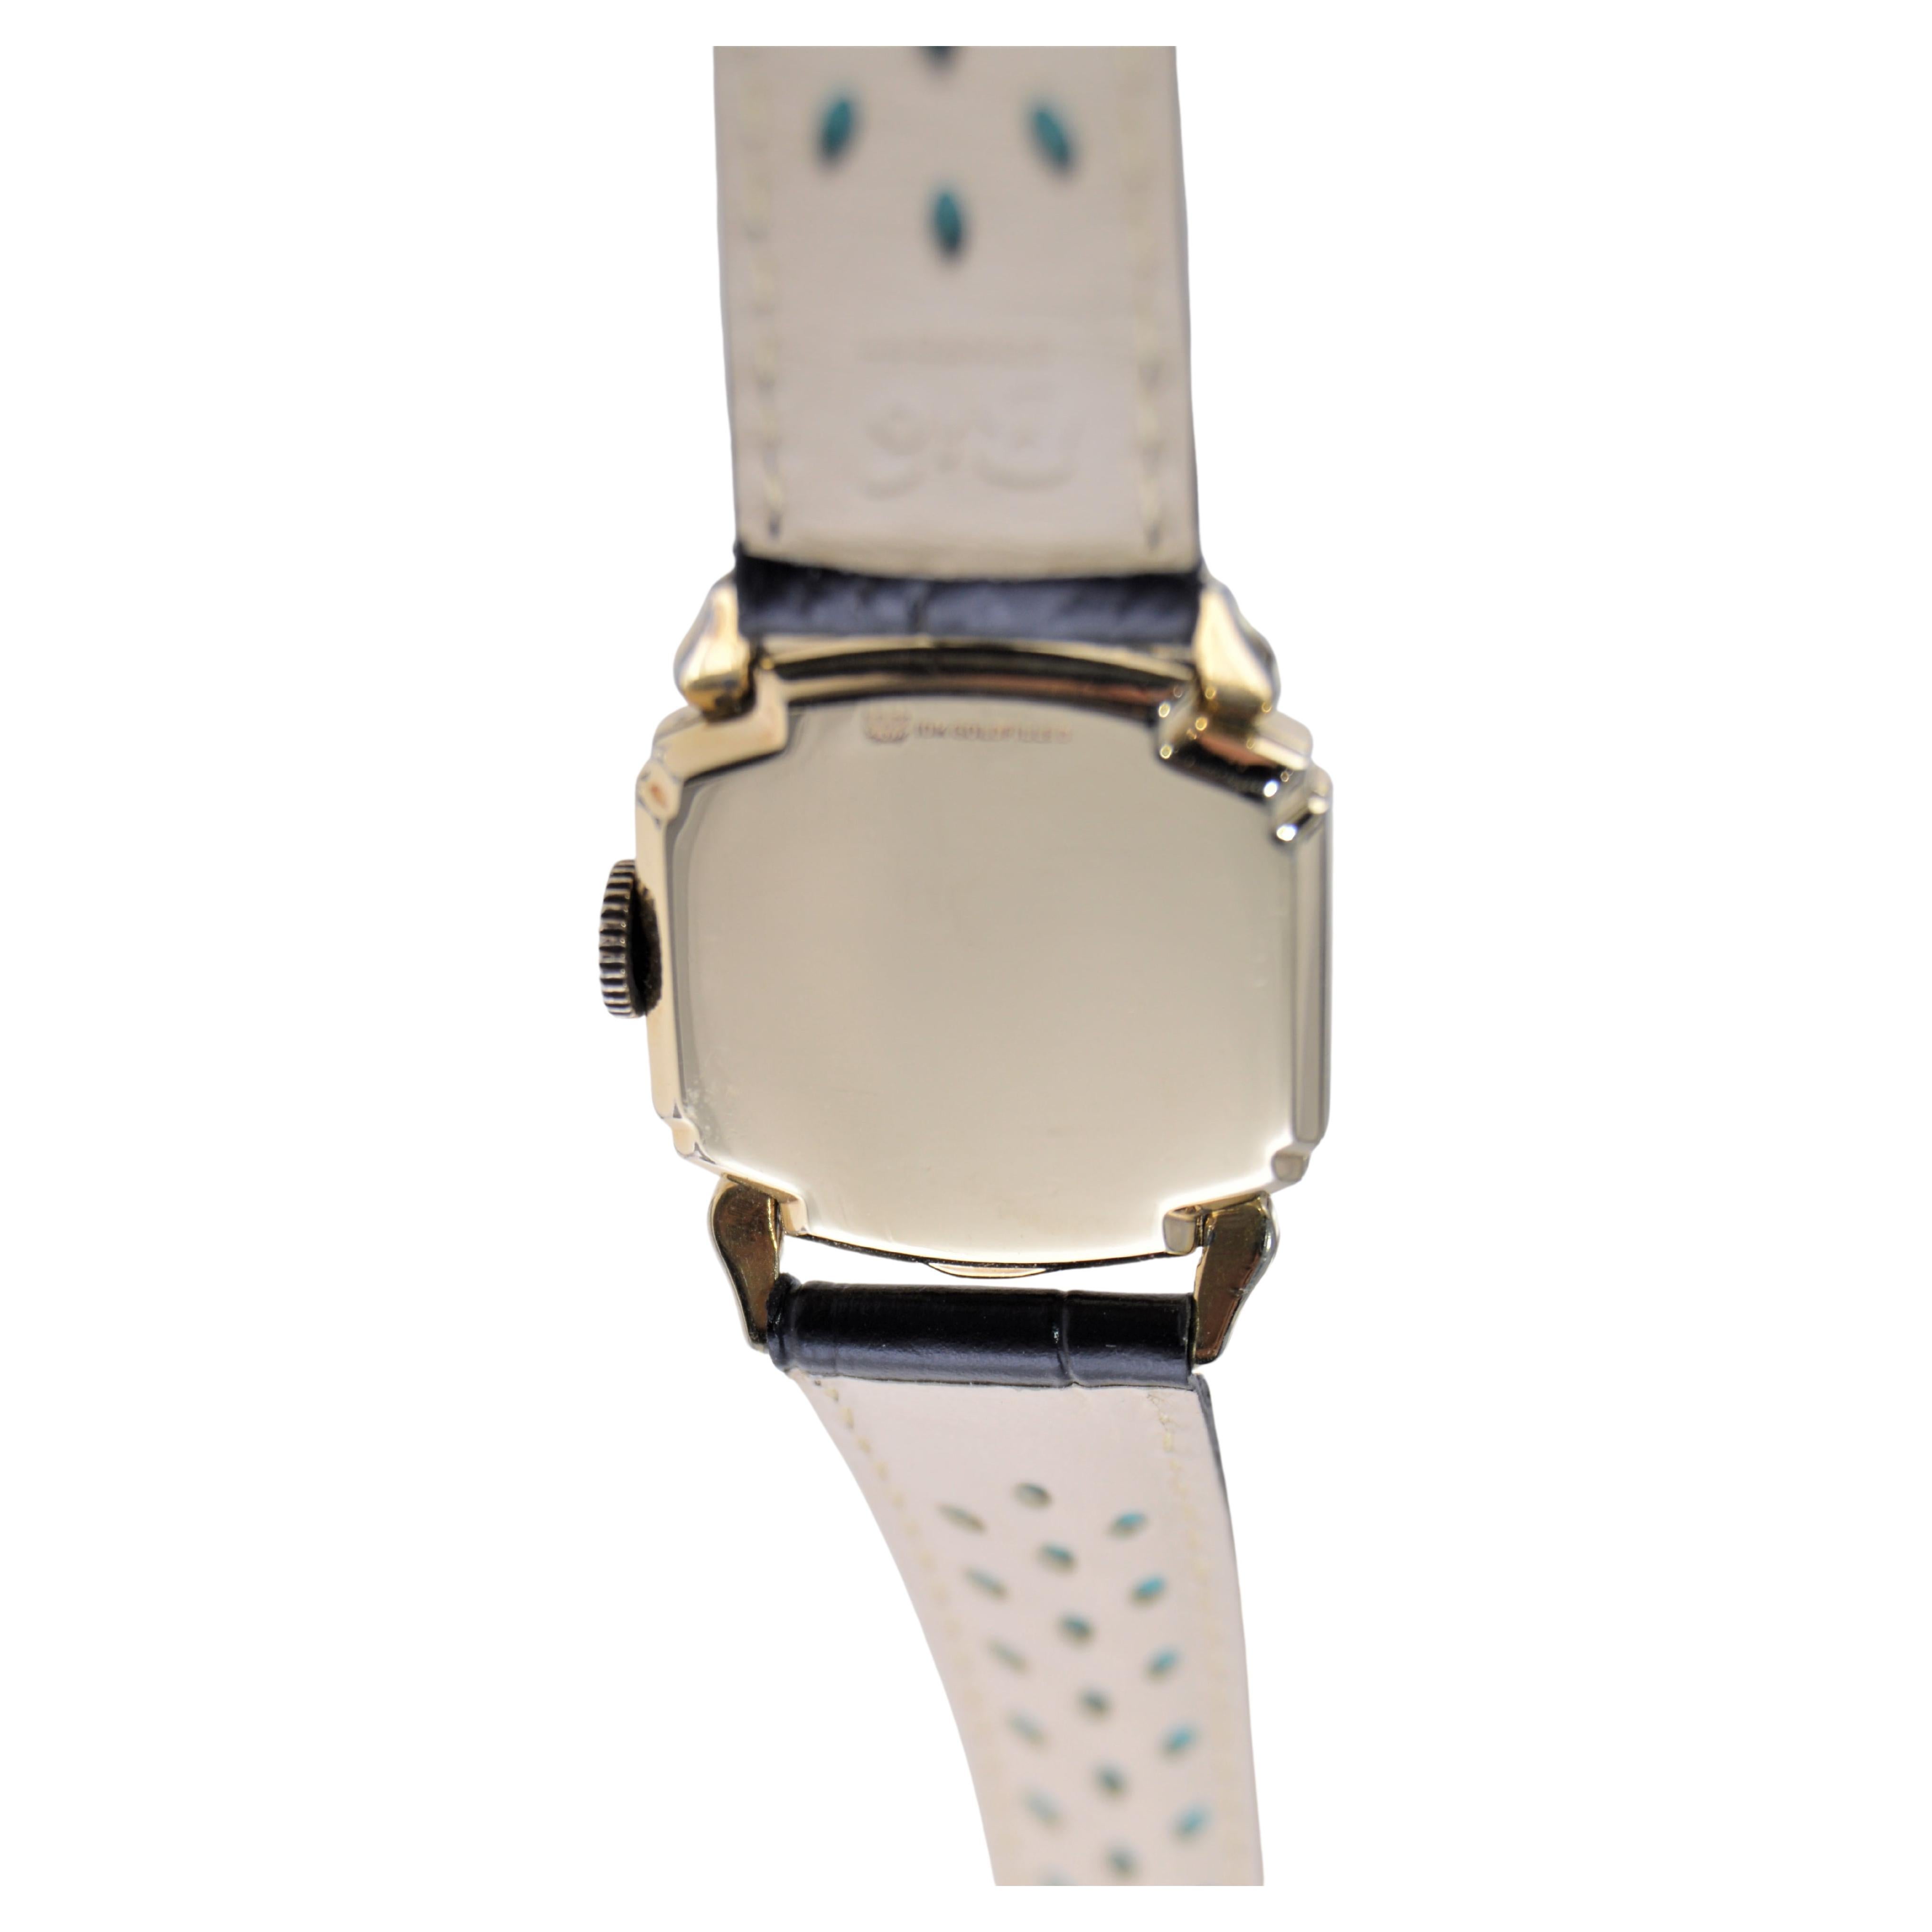 Elgin Gold Filled Art Deco Watch with Original Dial from 1940's For Sale 6